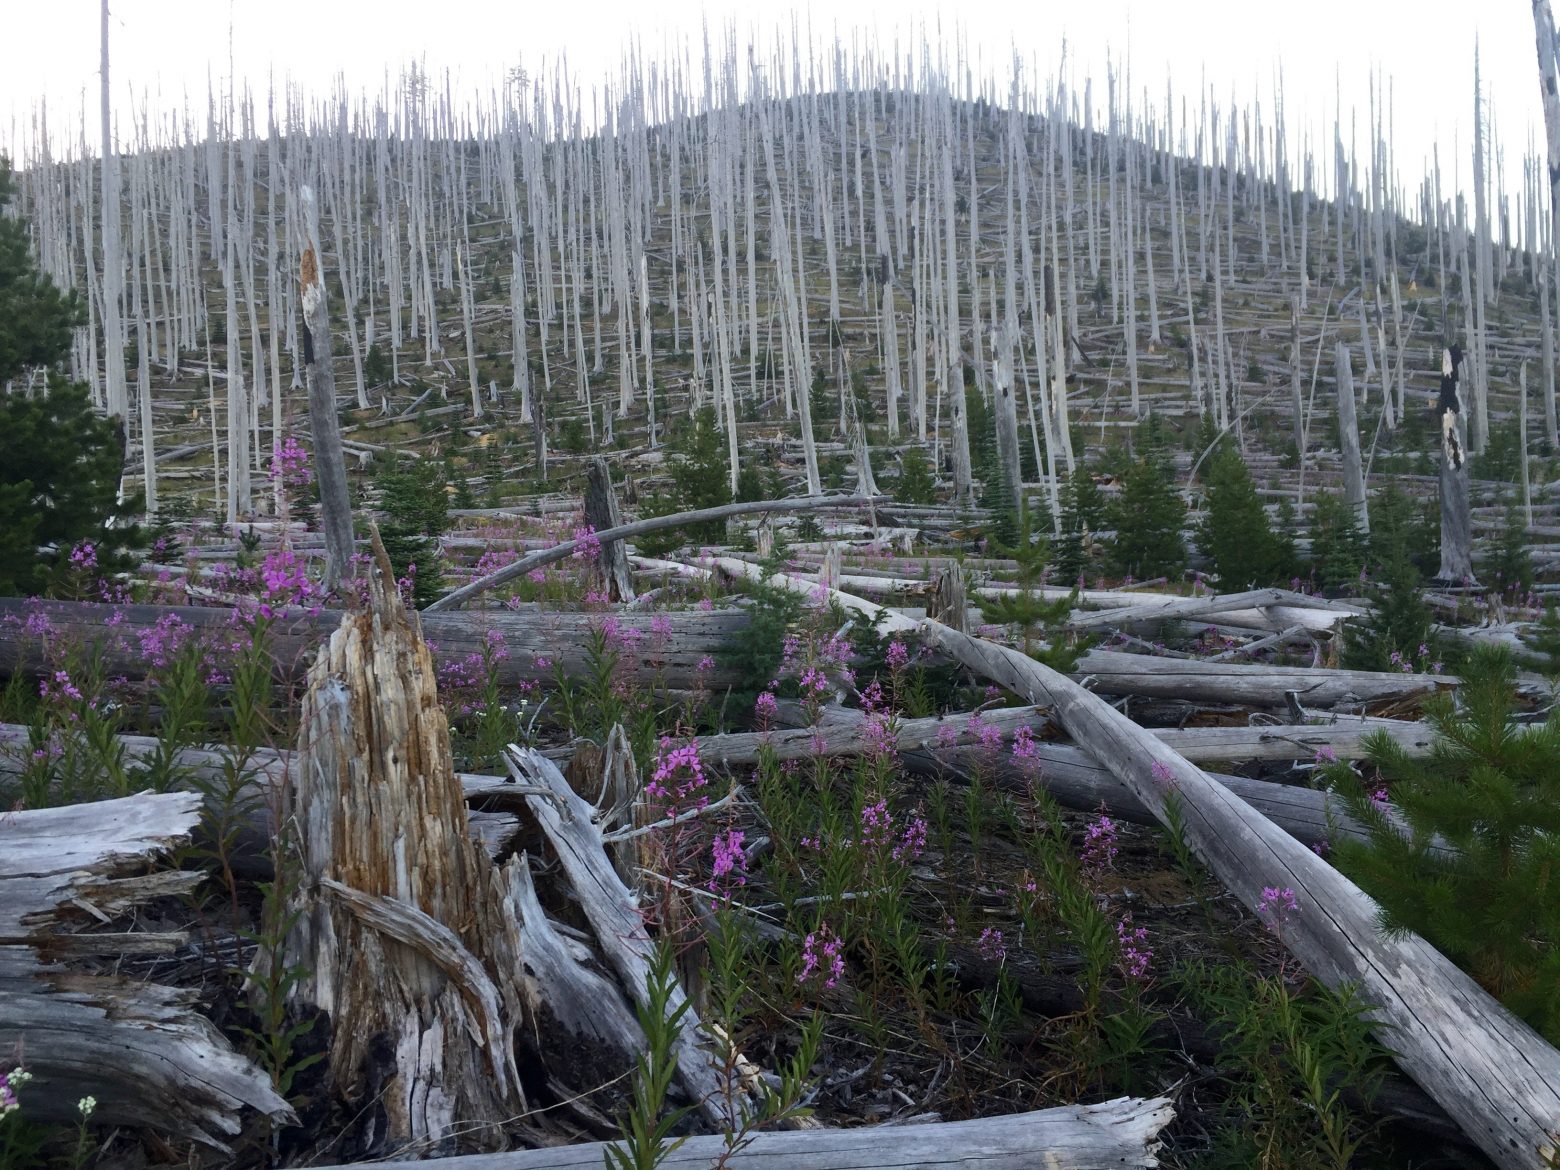 Post wildfire stand of dead trees looking like a porcupine